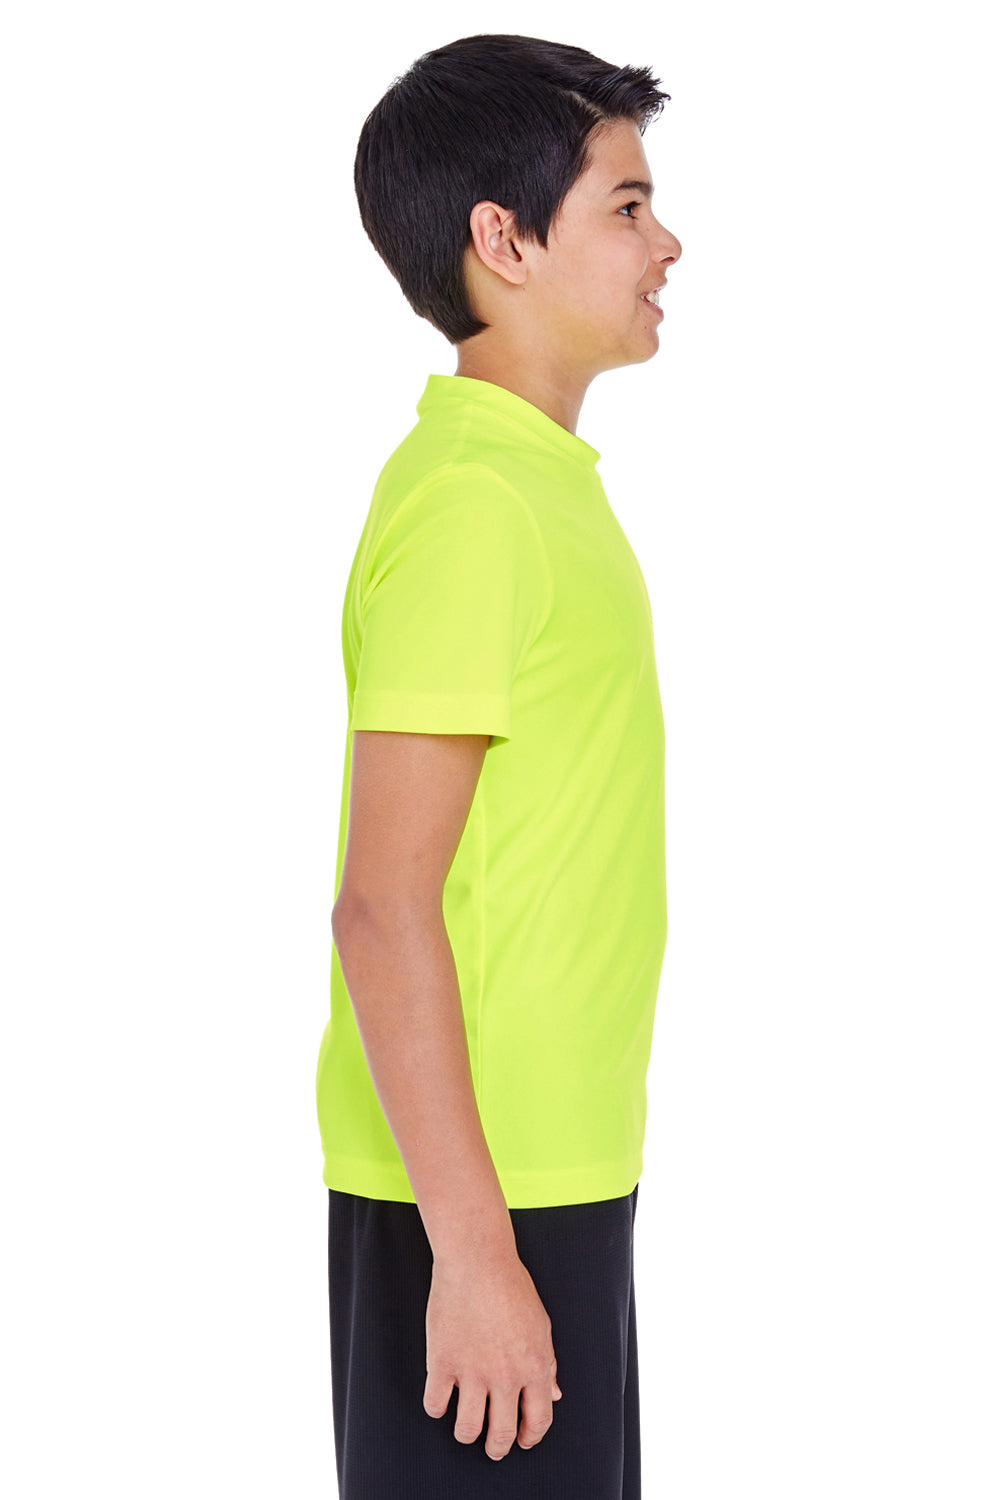 Team 365 TT11Y Youth Zone Performance Moisture Wicking Short Sleeve Crewneck T-Shirt Safety Yellow Side